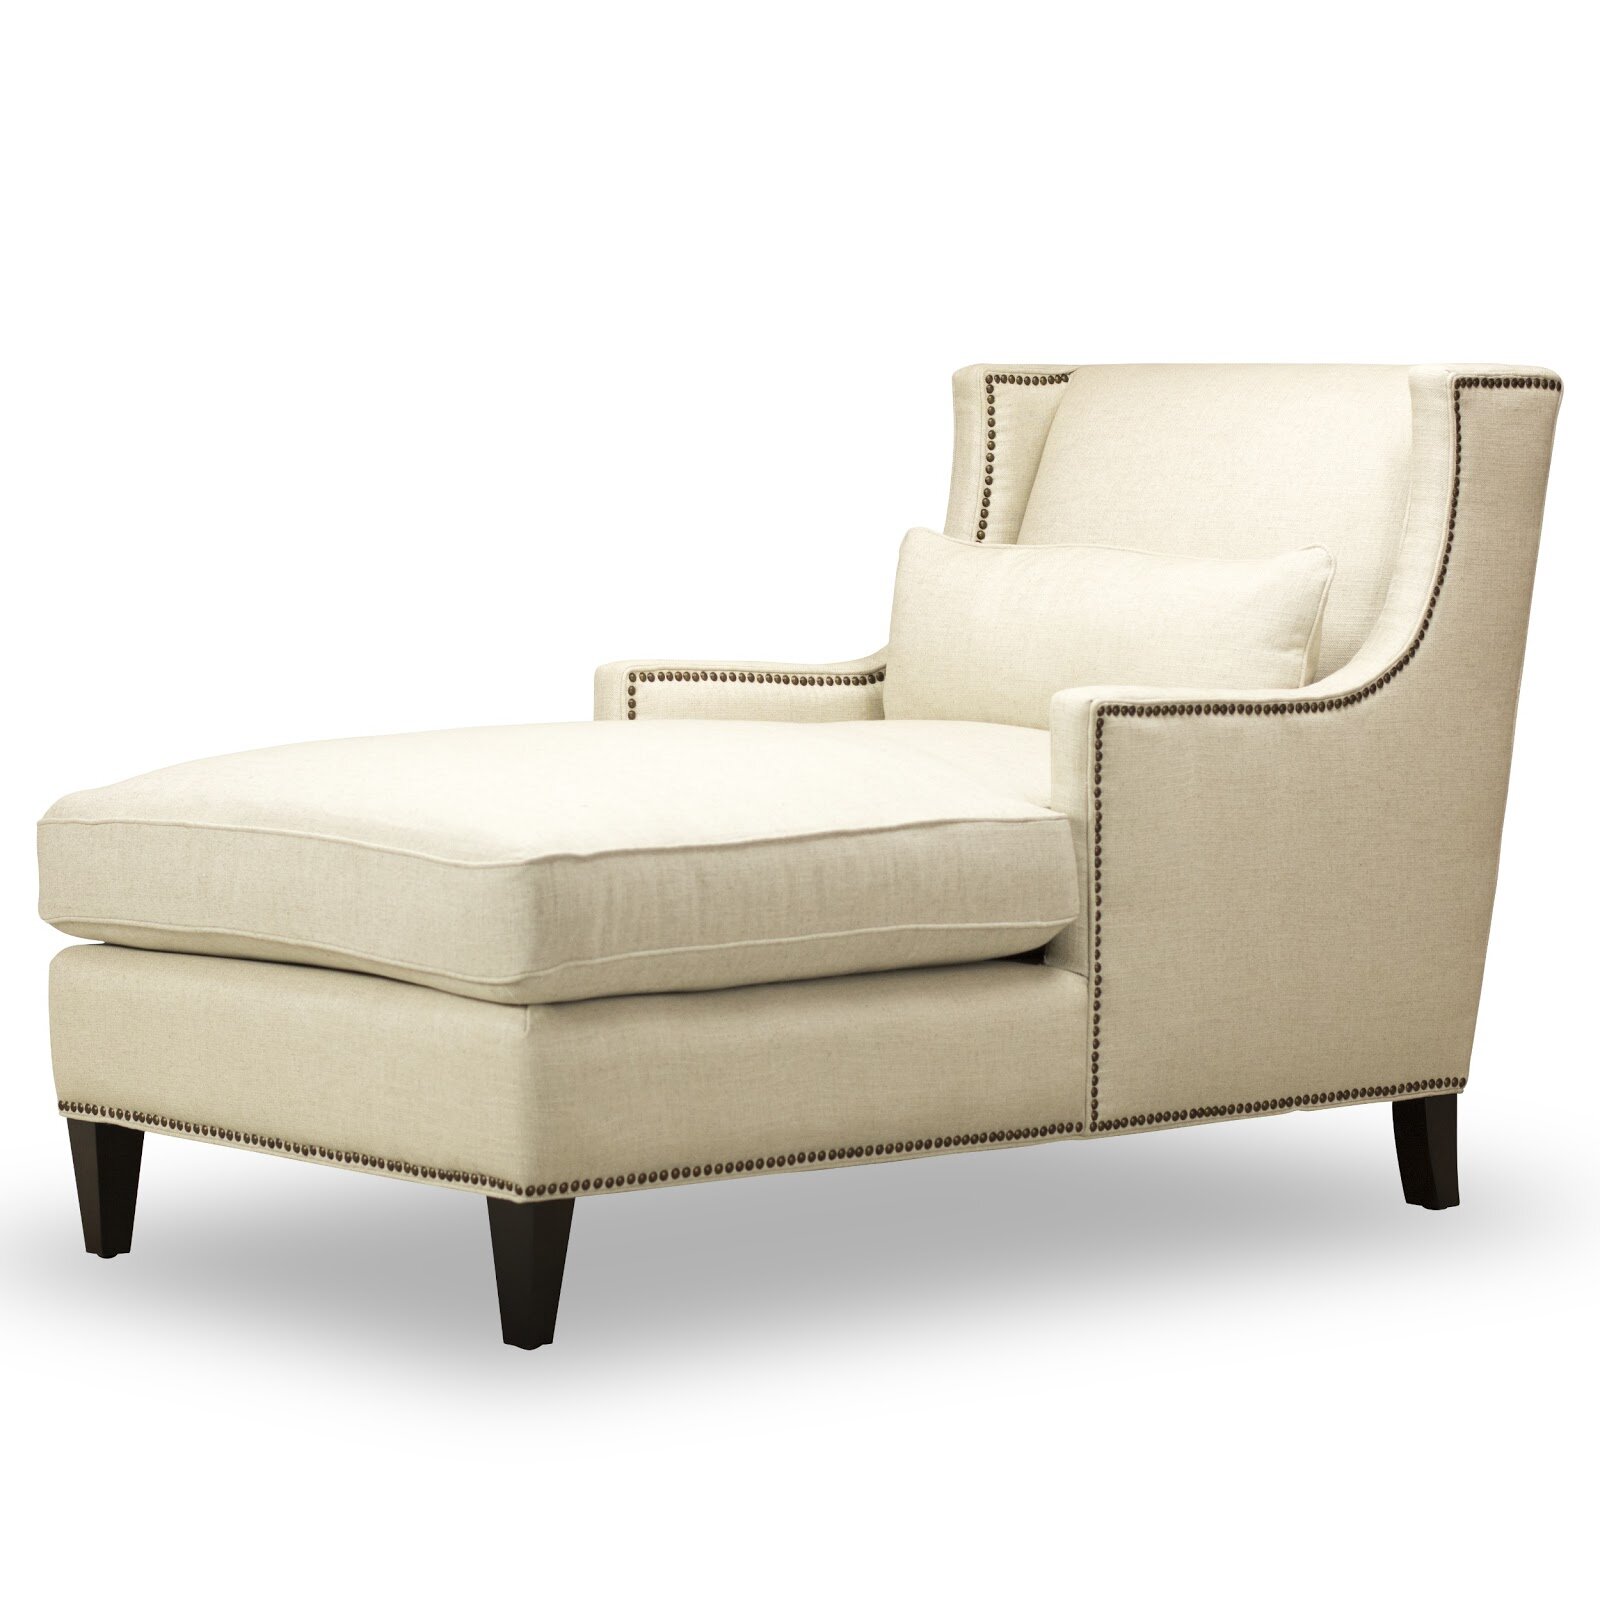 Maday Upholstered Chaise Lounge